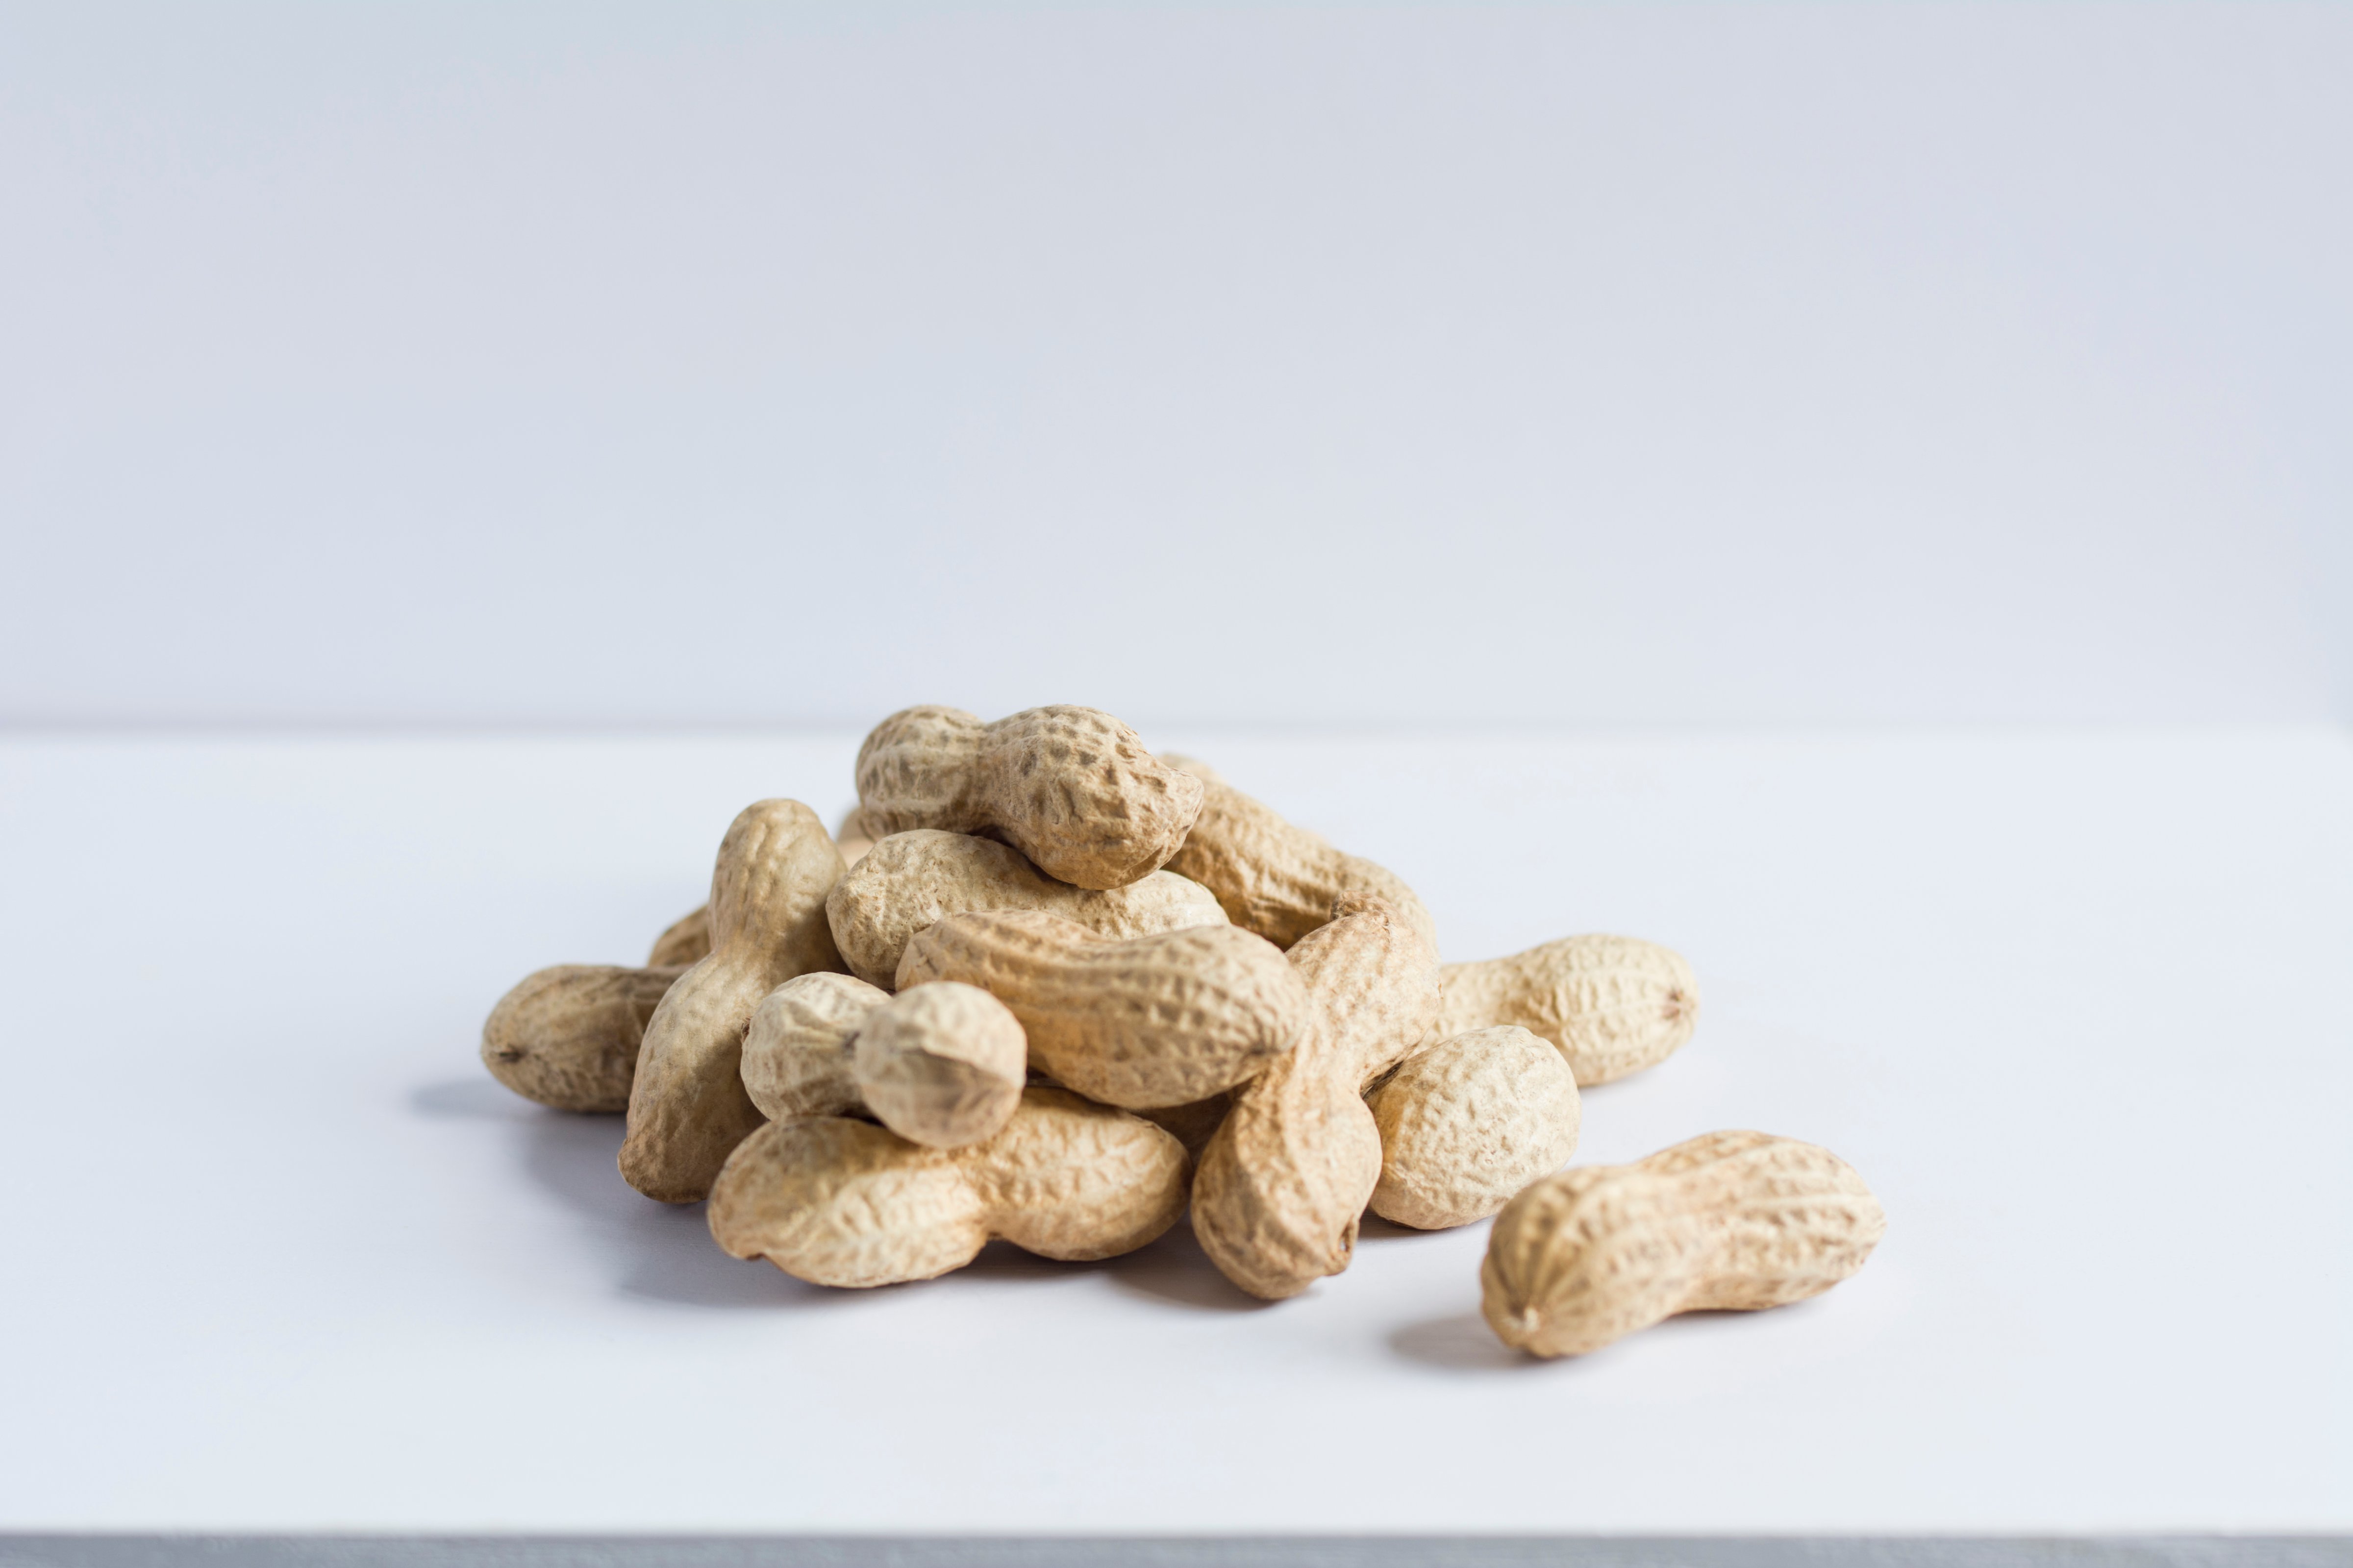 Pile of whole peanuts in shell